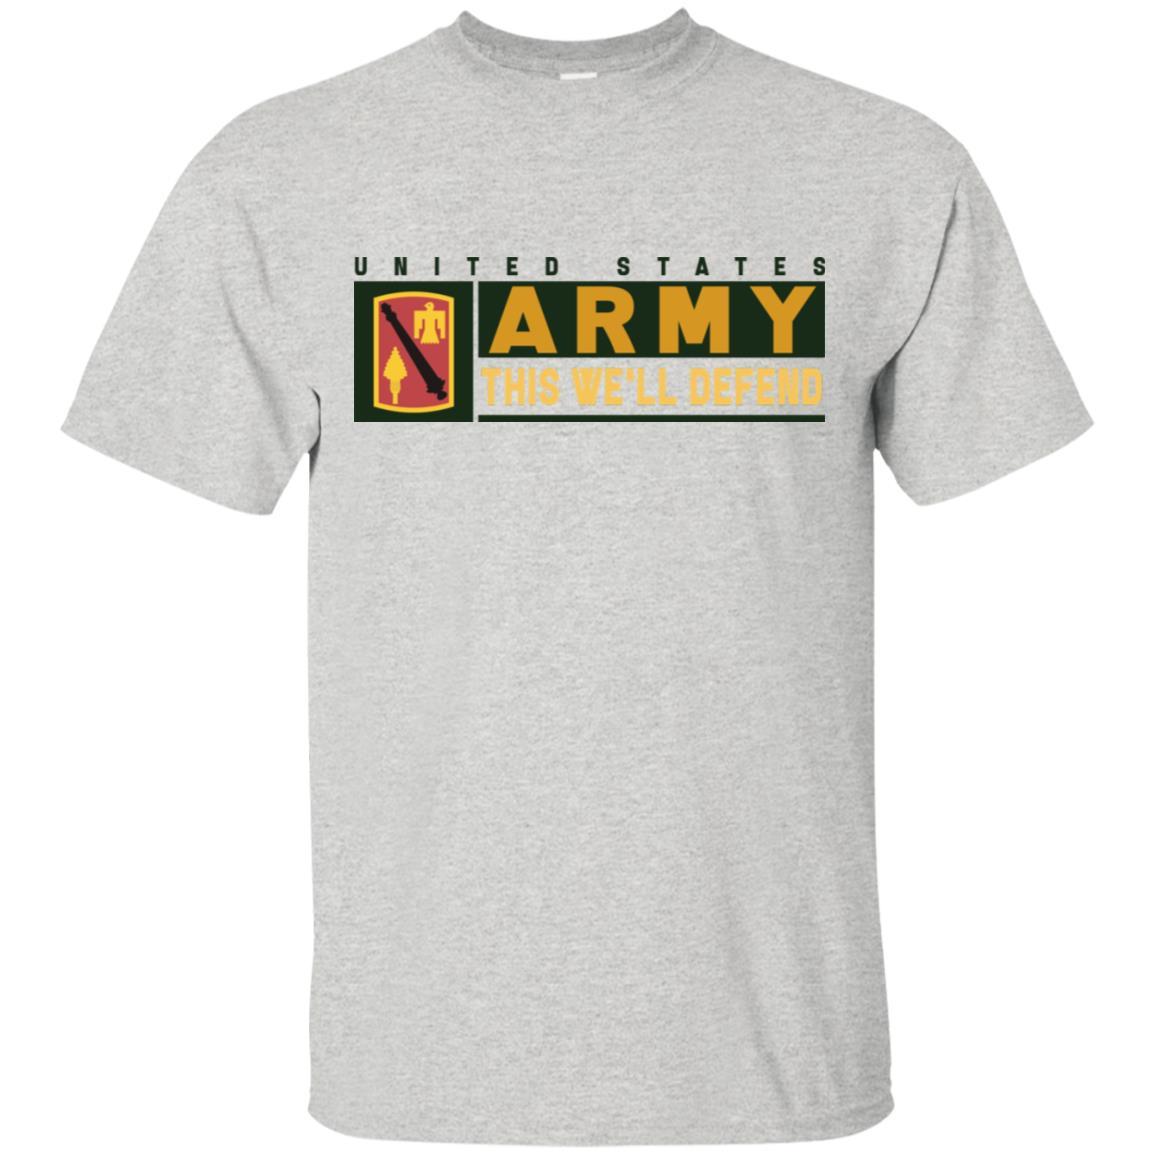 US Army 45 FIRES BRIGADE- This We'll Defend T-Shirt On Front For Men-TShirt-Army-Veterans Nation